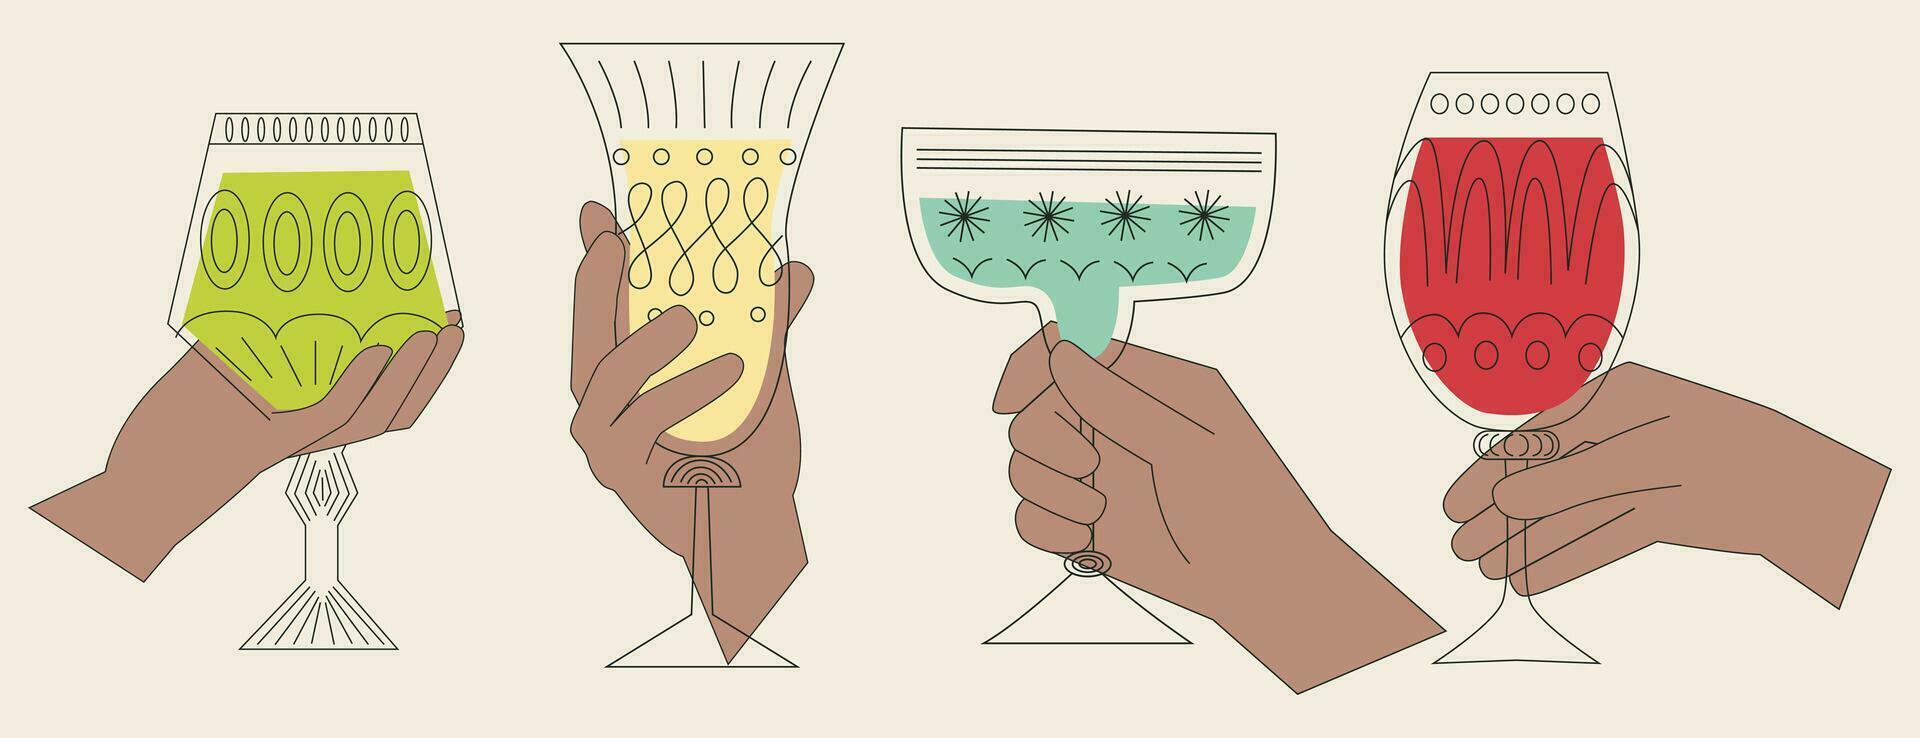 A set of alcoholic cocktails in glasses of different shapes. Hands hold drinks in different types of vintage glasses. Linear vector illustration. Cartoon retro style